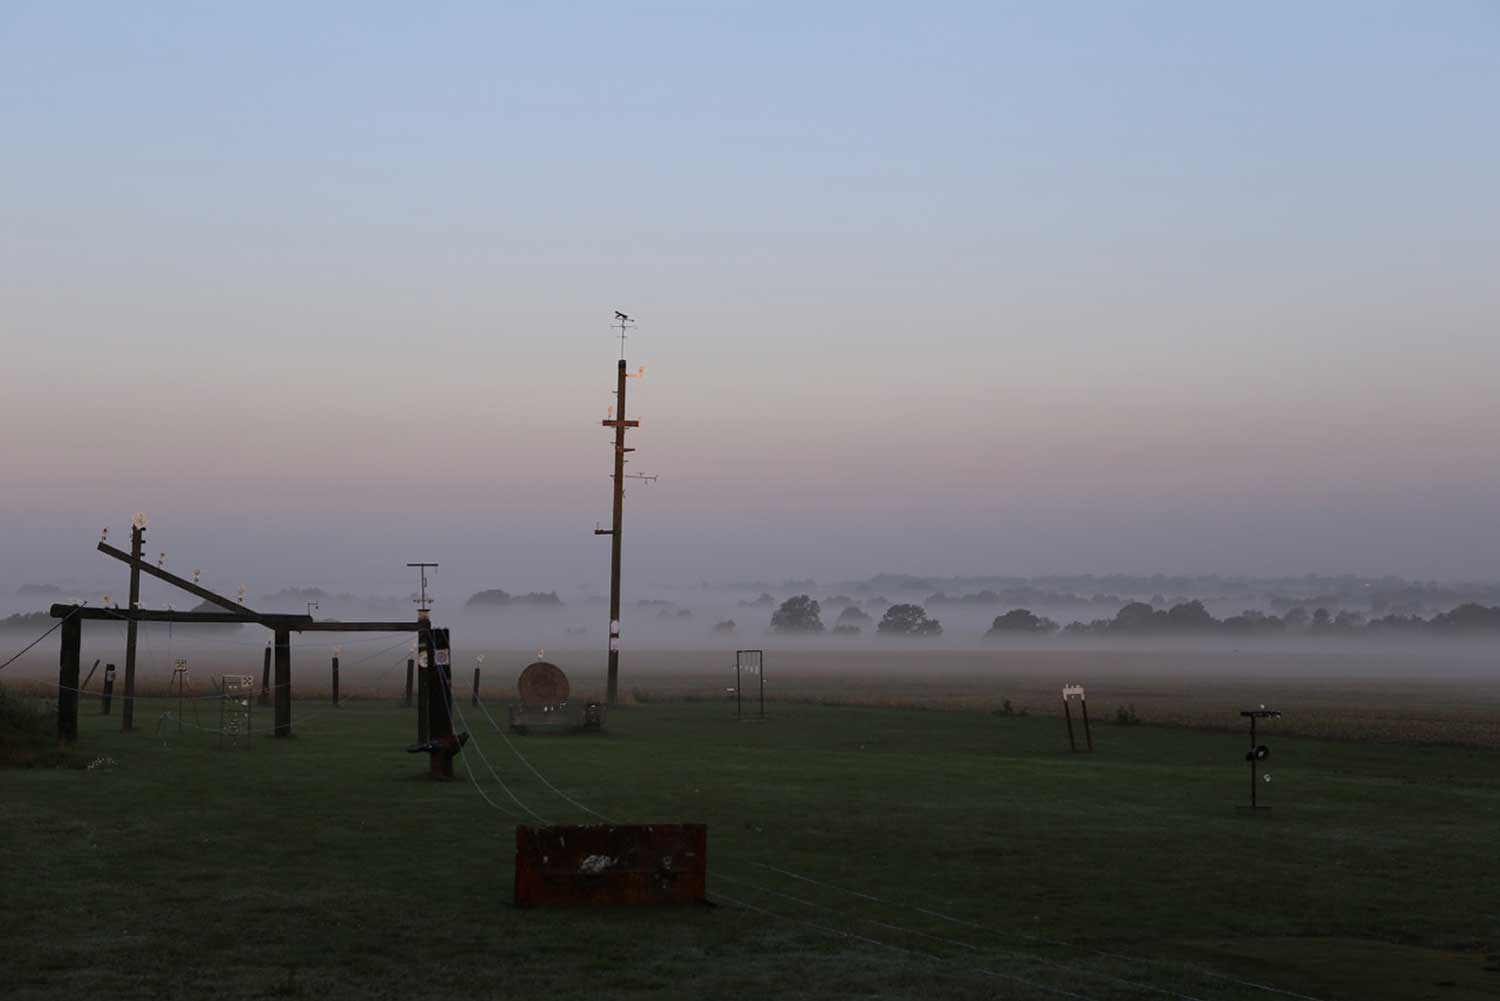 The outdoor shooting range at Pete’s Airgun Farm in Essex